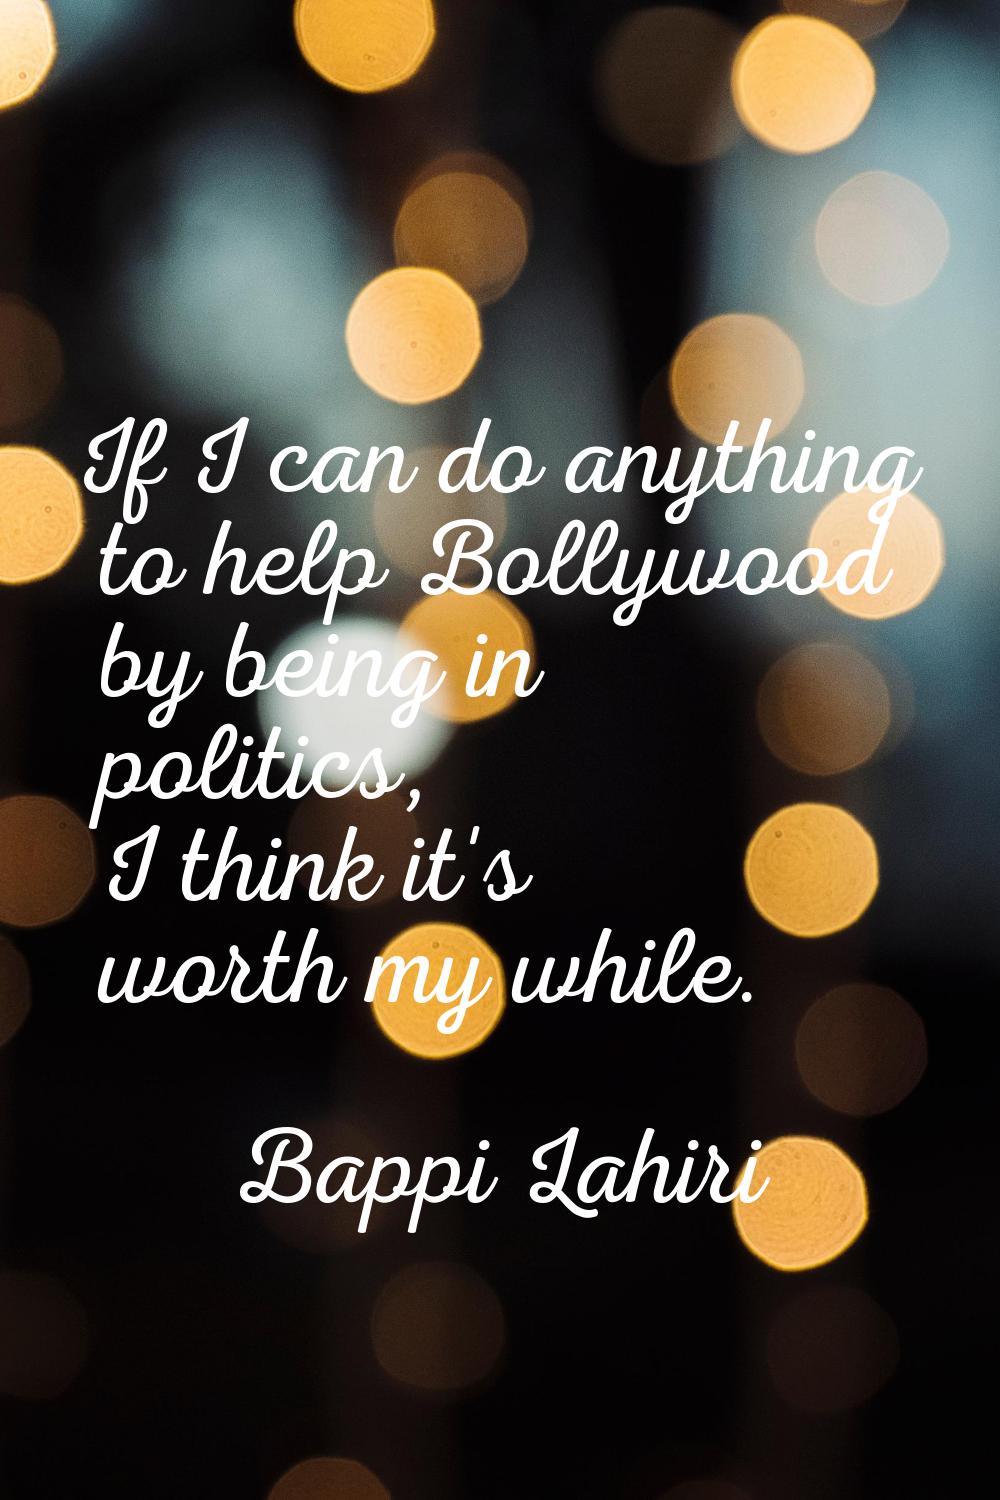 If I can do anything to help Bollywood by being in politics, I think it's worth my while.